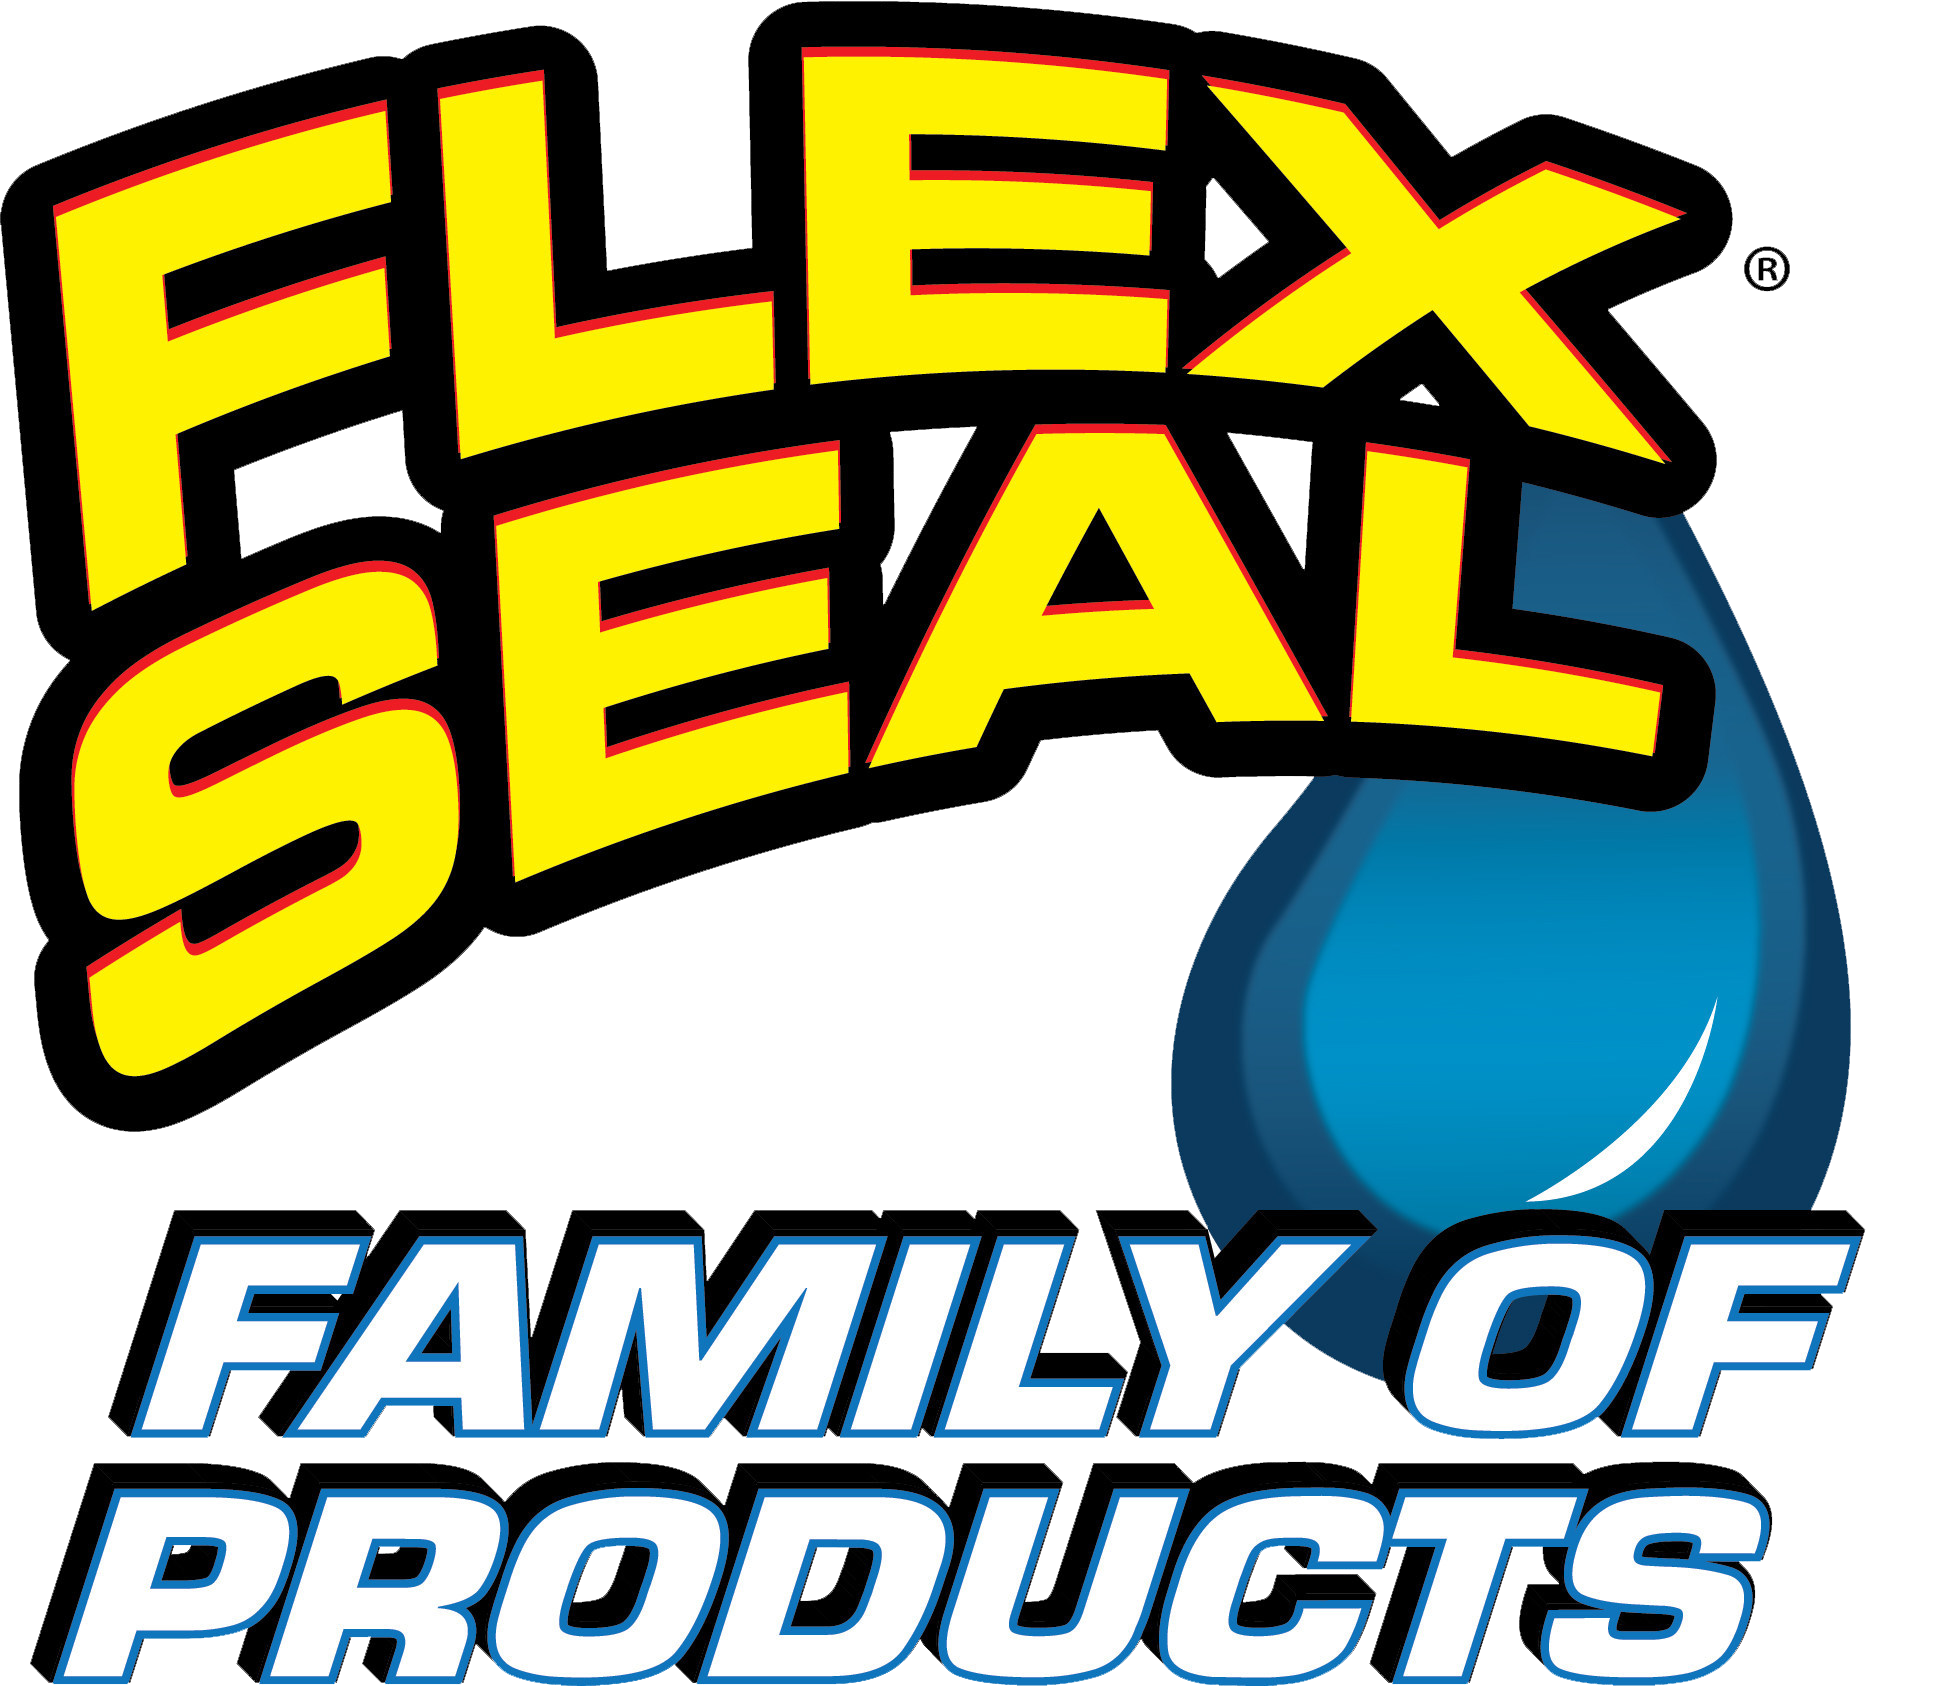 Flex Seal - Do you know what will stop this leak? 🤔 A. Flex Tape